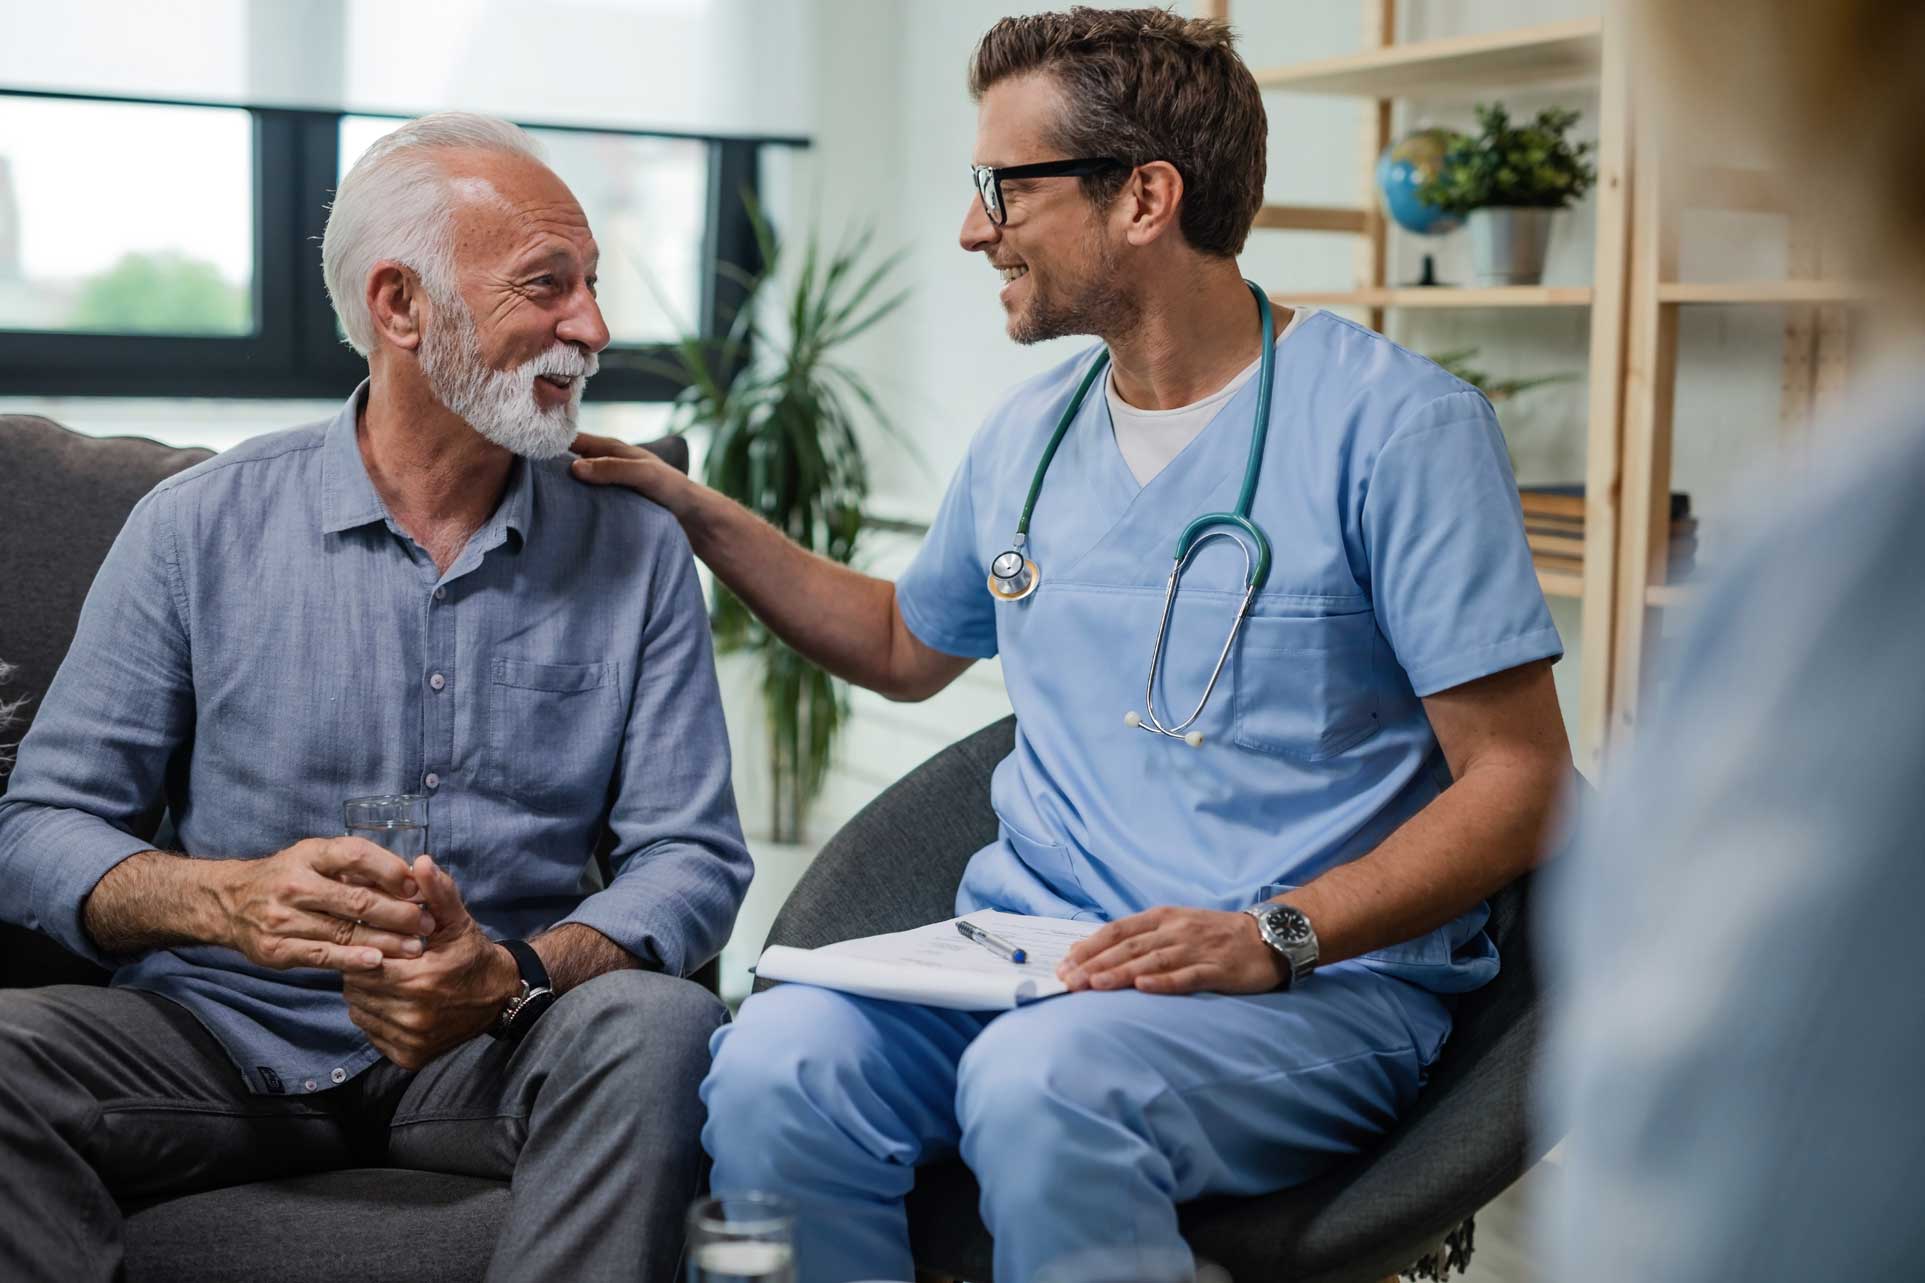 Male patient talking with male doctor.